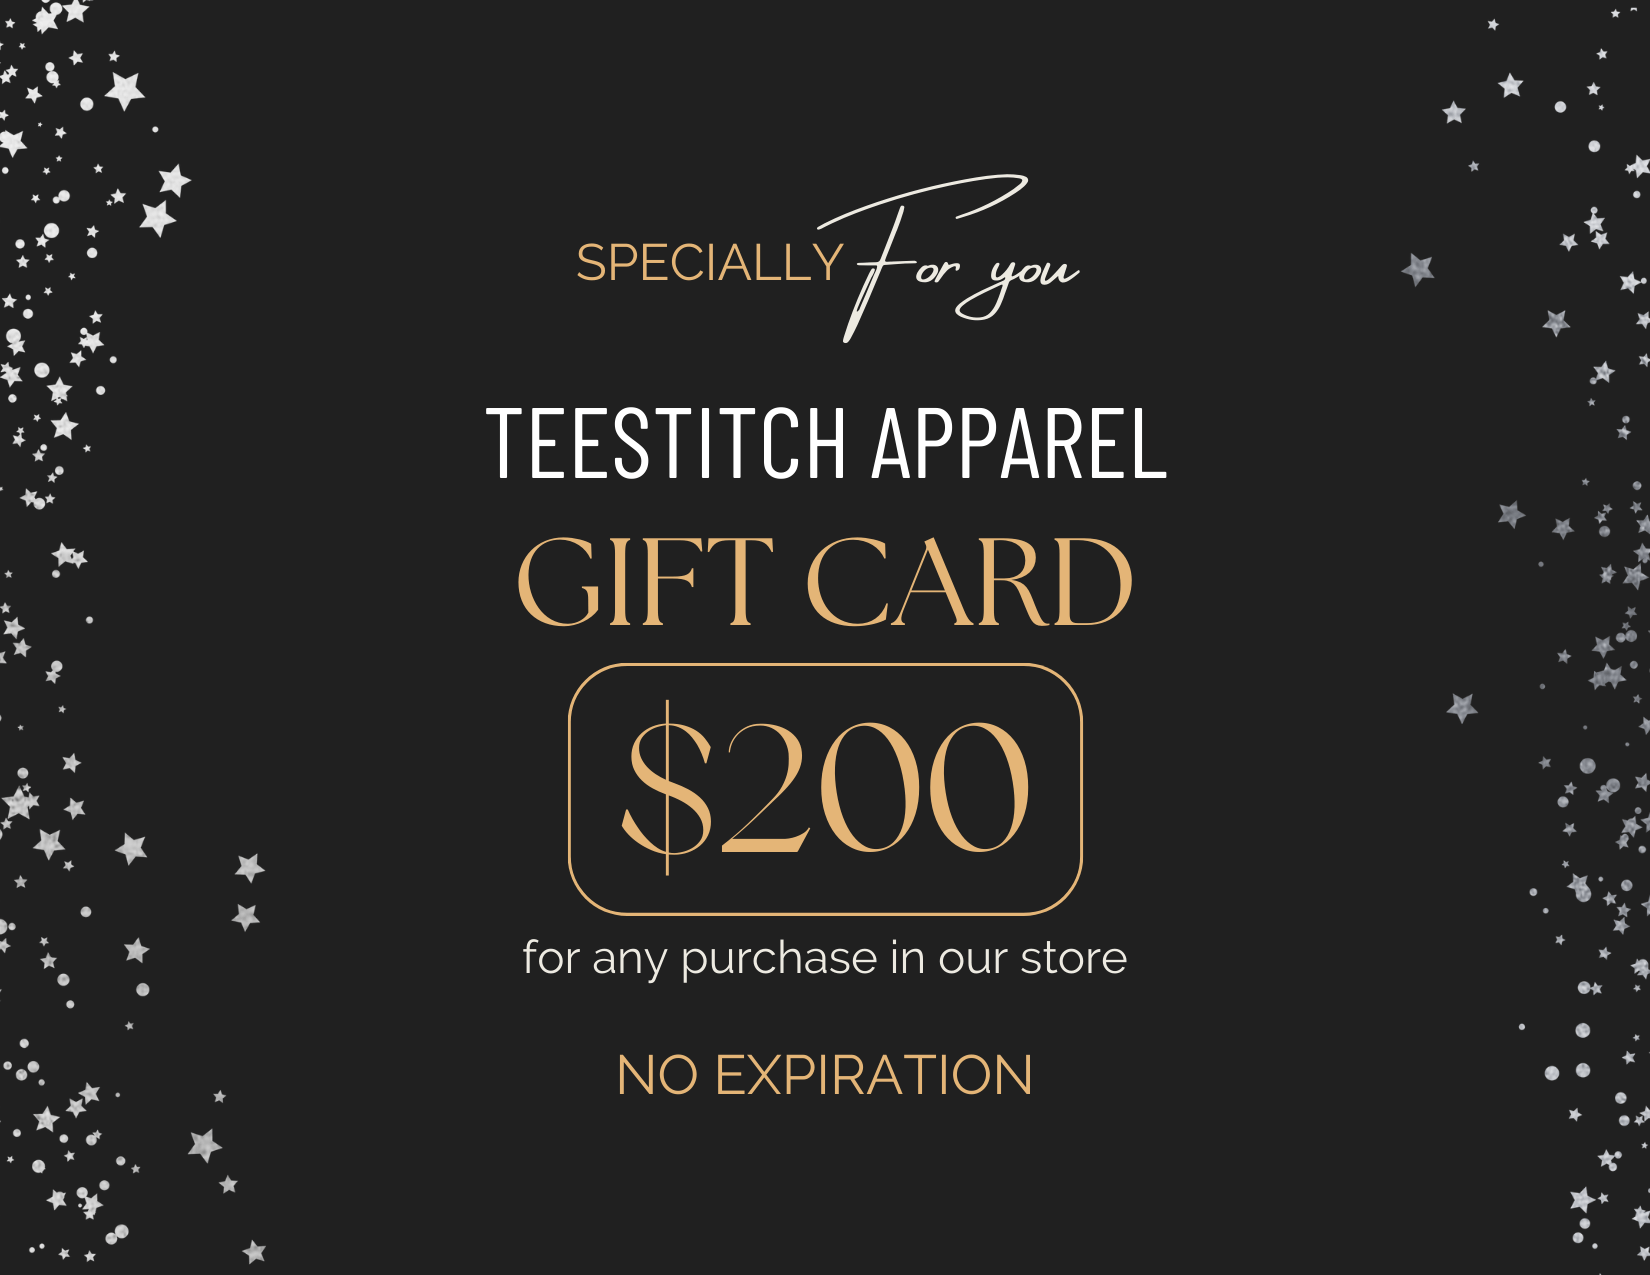 TeeStitch Apparel Gift Cards Gift Card image